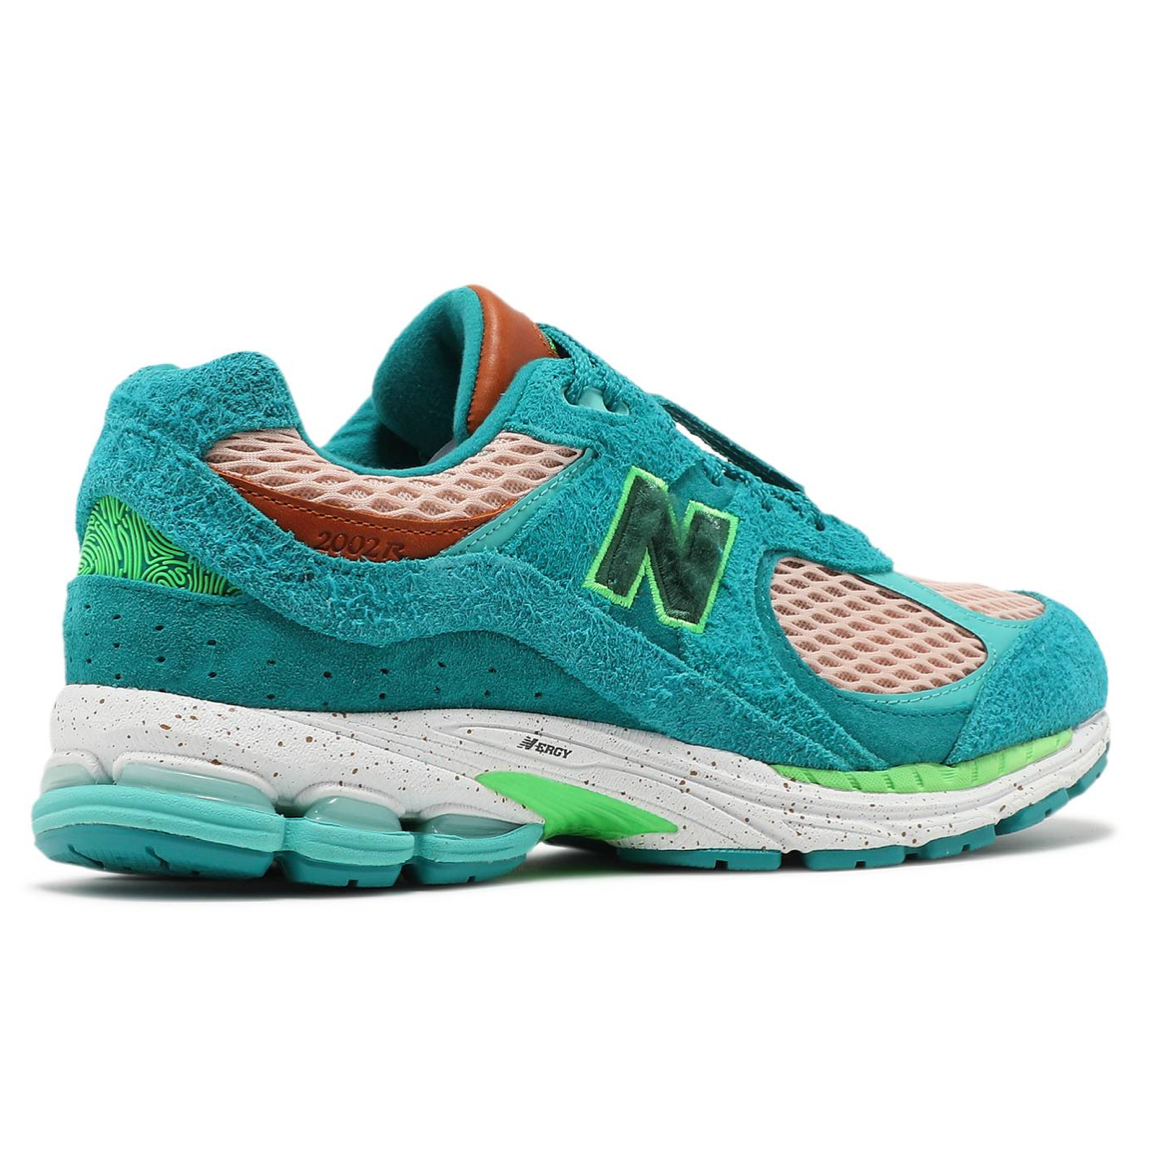 New Balance 2002R Salehe Bembury Water Be The Guide by New Balance from £225.00